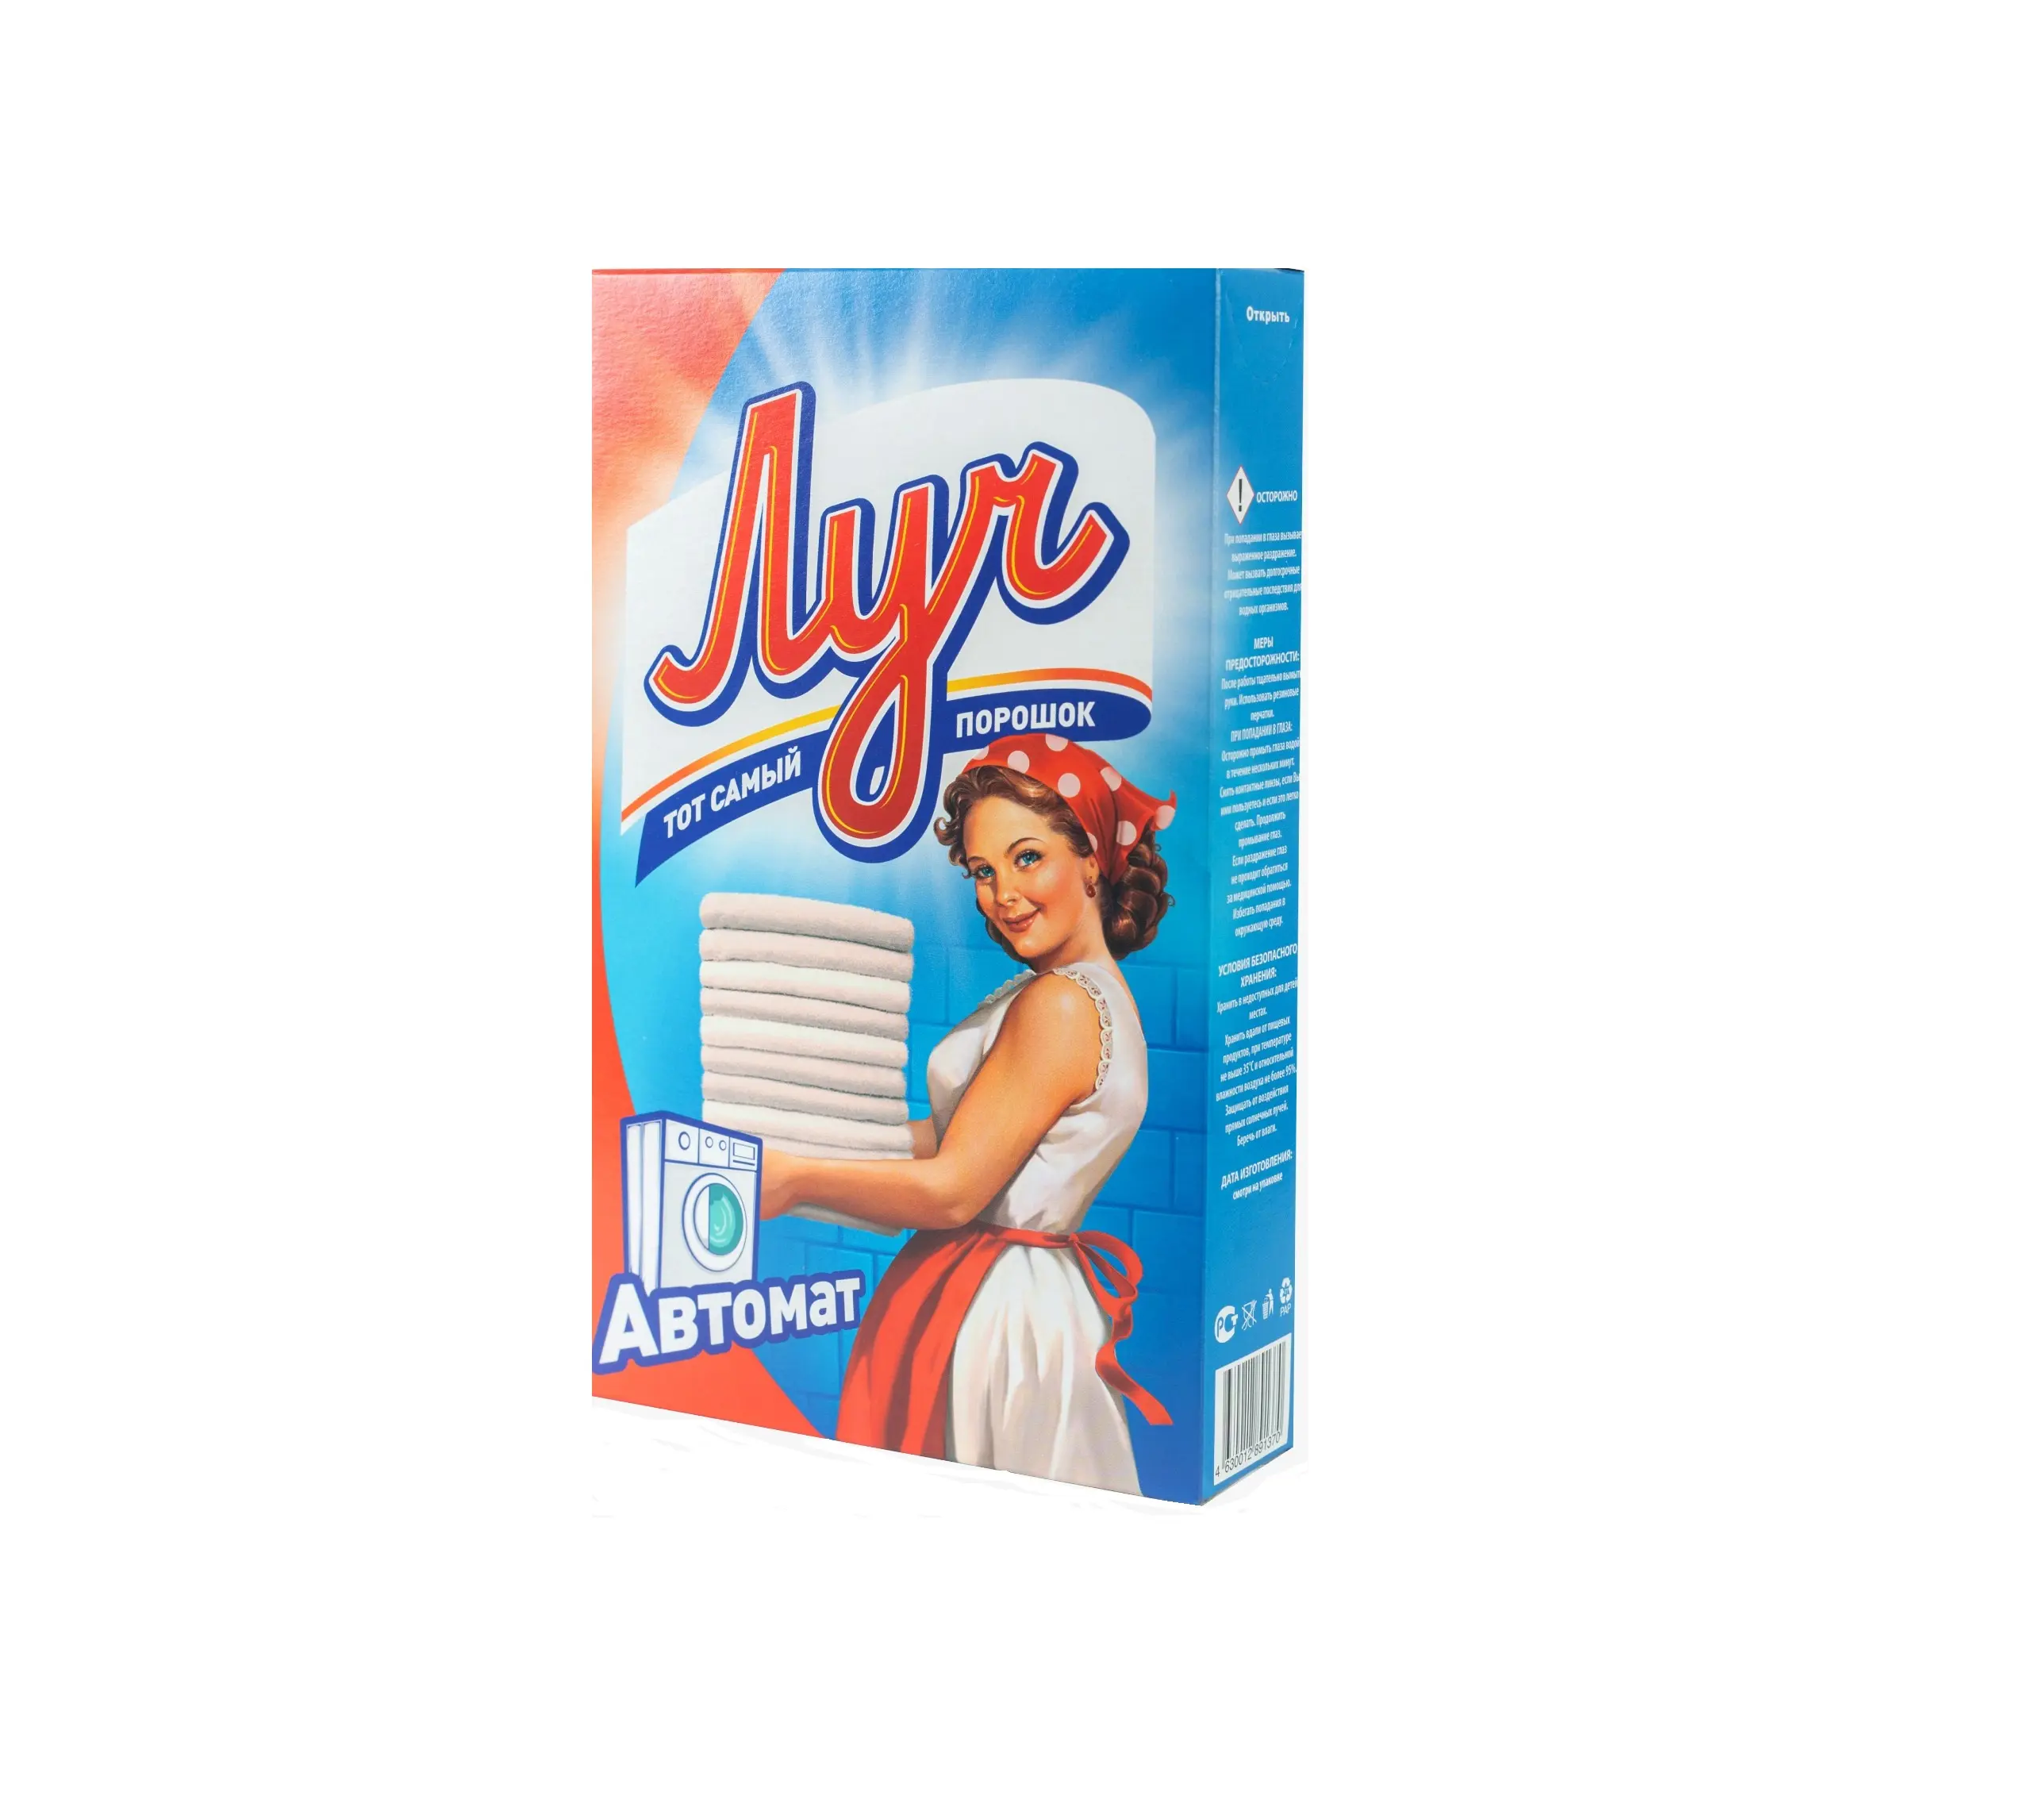 "RAY" automatic 400 g. Universal Clothes Cleaning Detergent Household Cleaner Laundry Powder Detergent